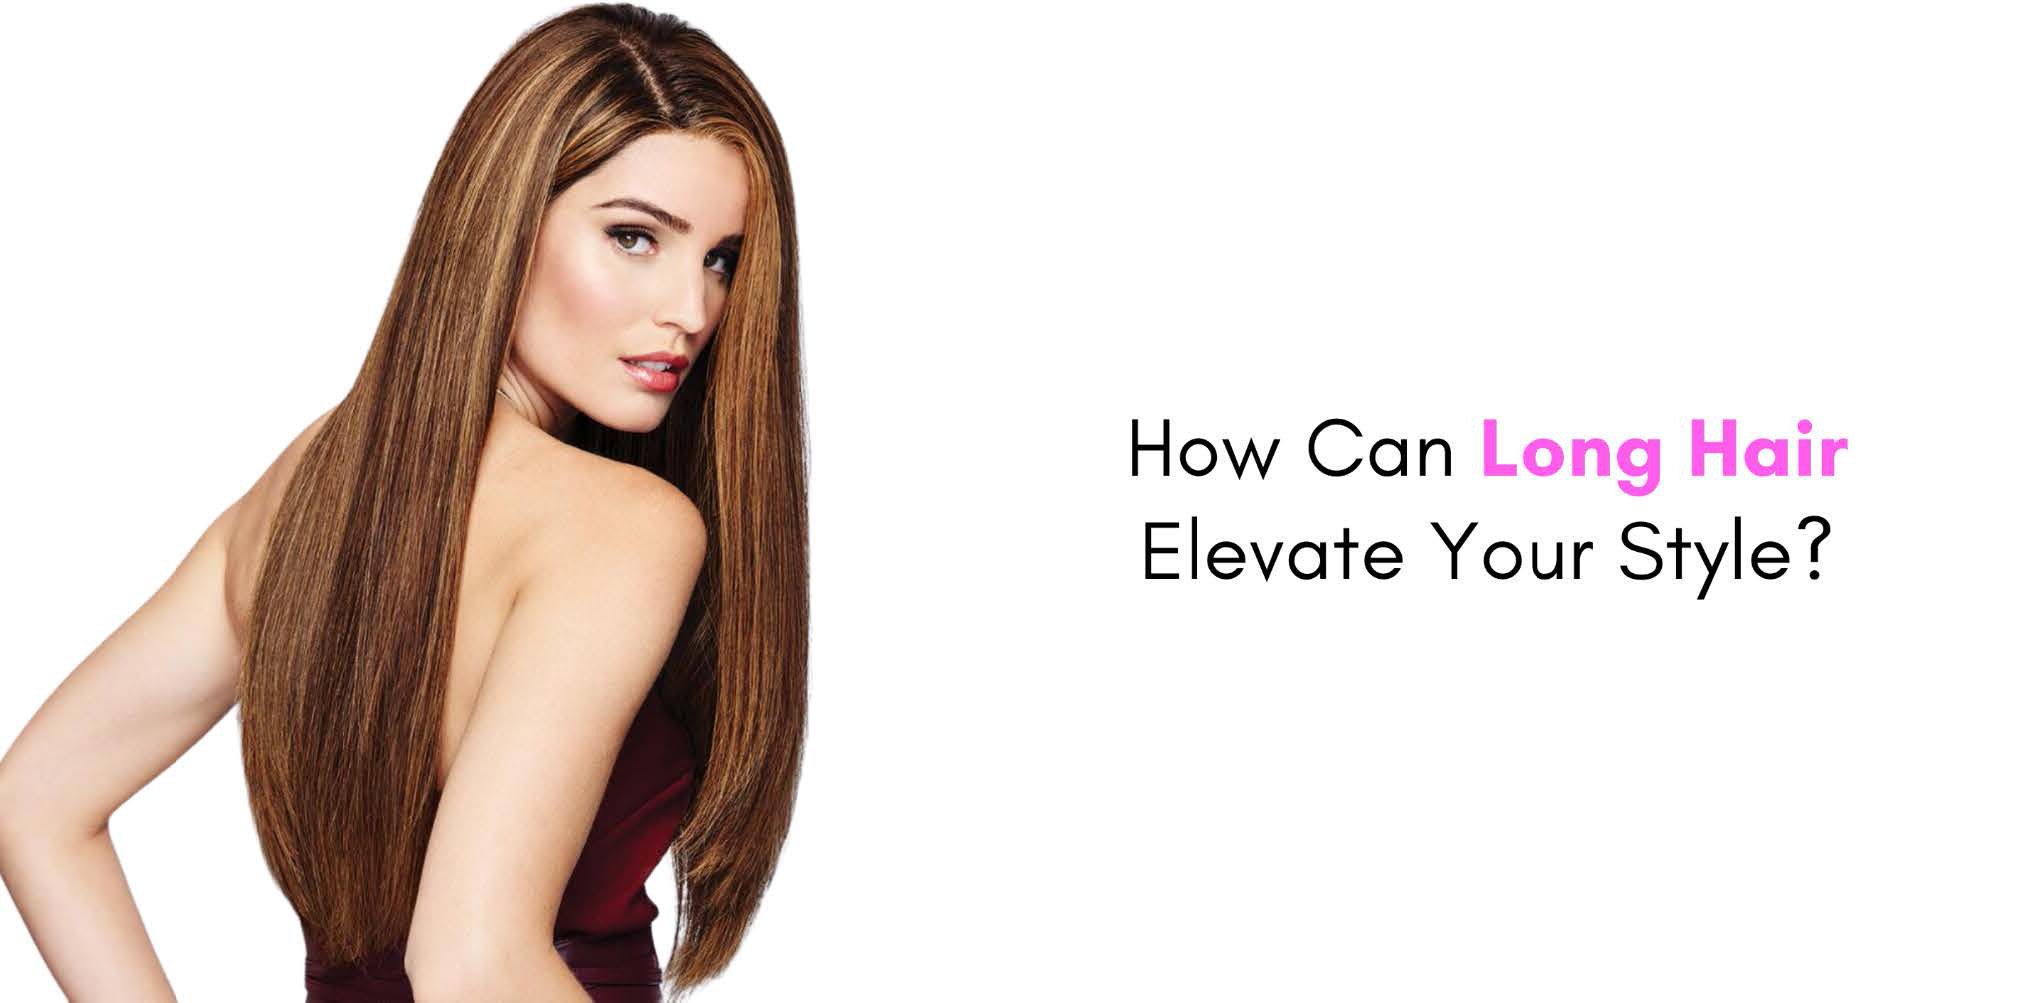 How Can Long Hair Elevate Your Style?